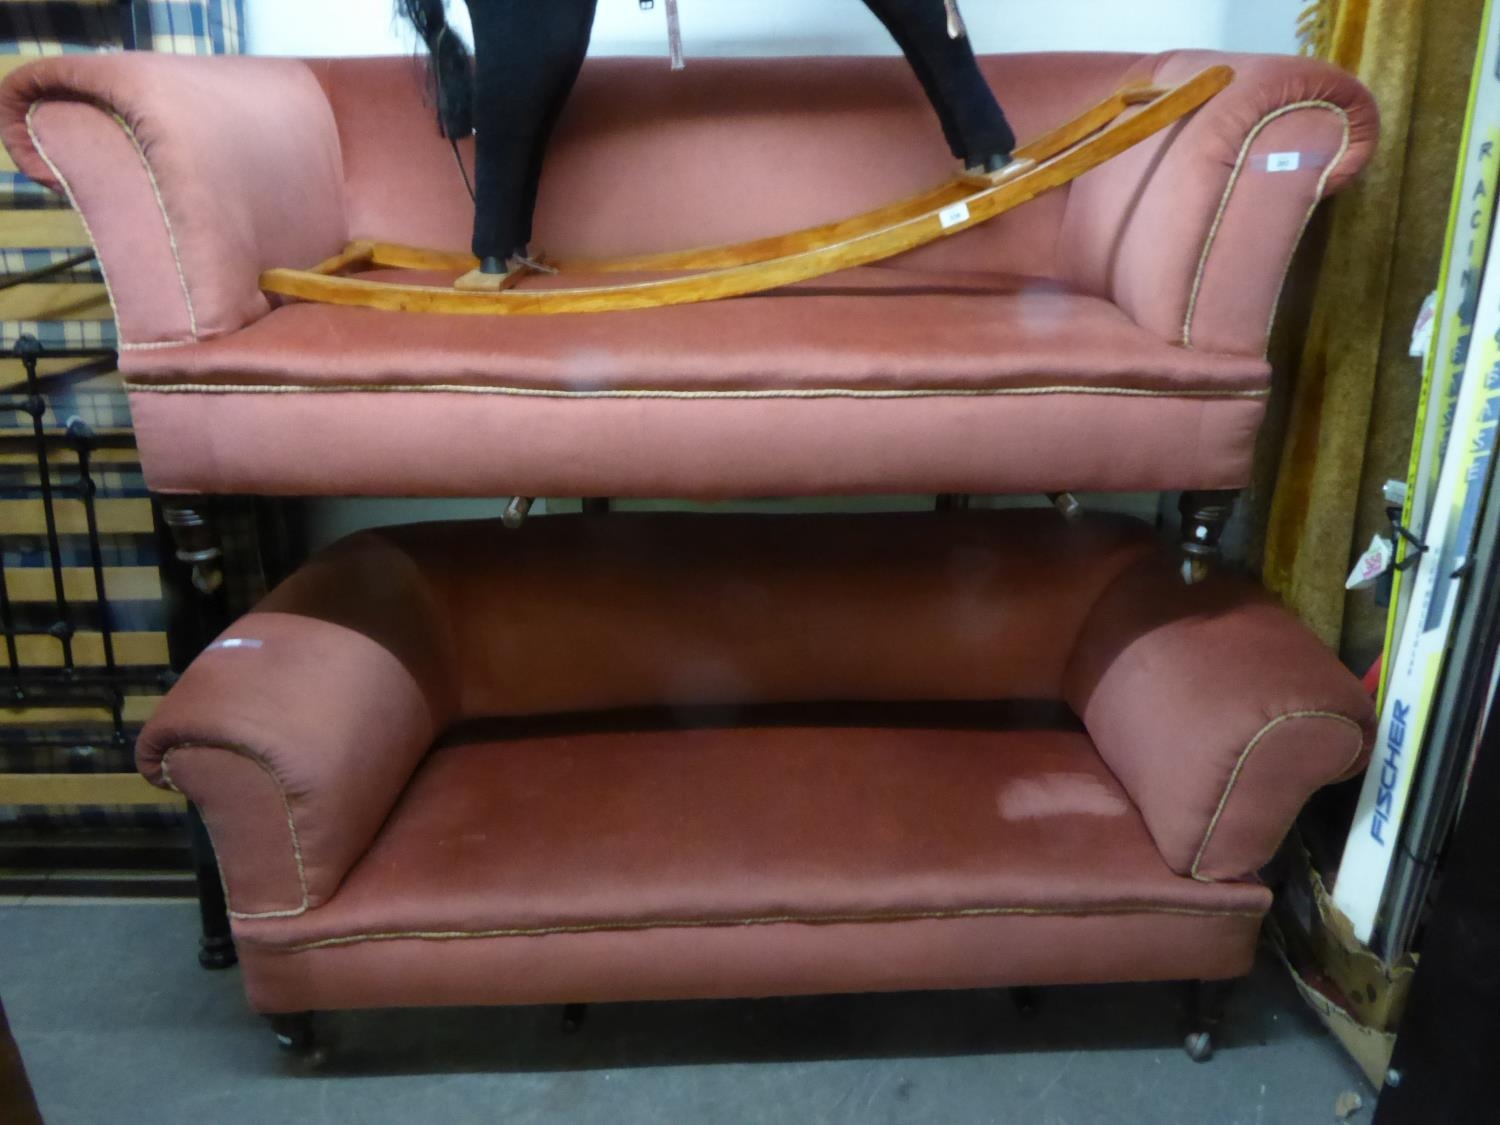 NEAR PAIR OF VICTORIAN DROP-END CHESTERFIELD SOFAS, covered in pale pink velour, 72? x 32?, one with - Image 2 of 2